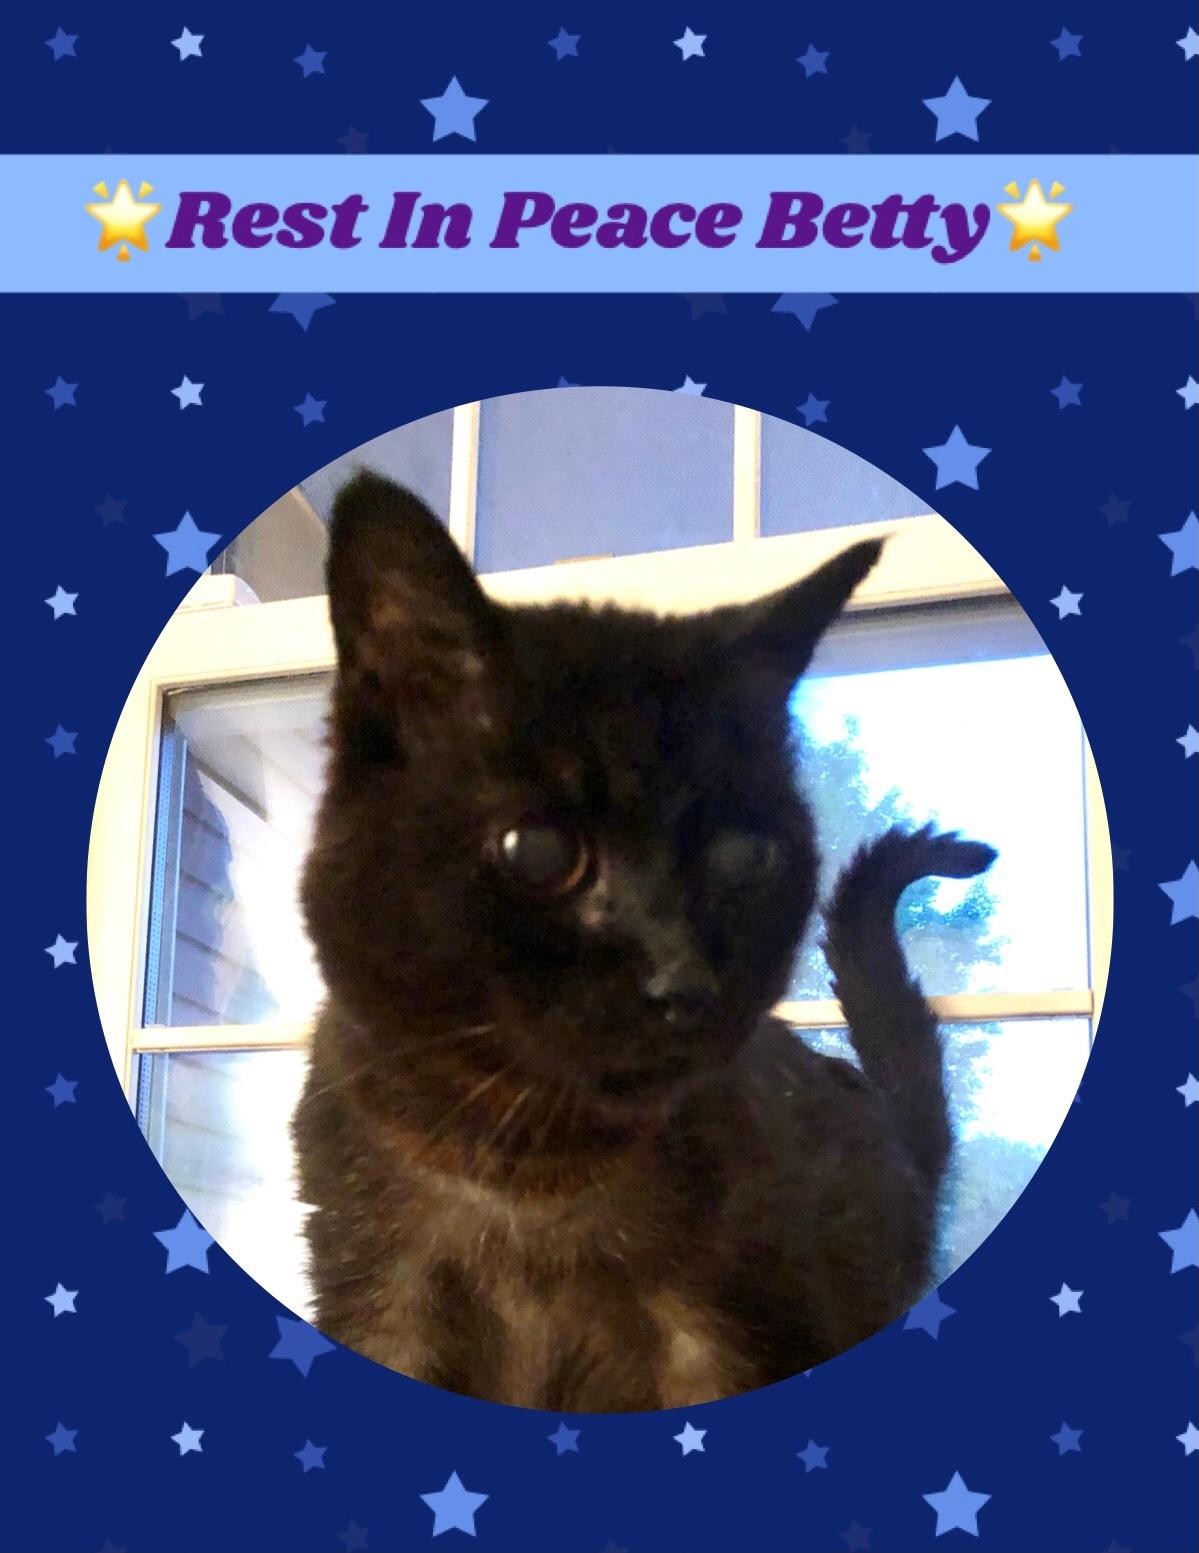 Betty, a stray black cat who made her home a The Lily Pond, recently died.